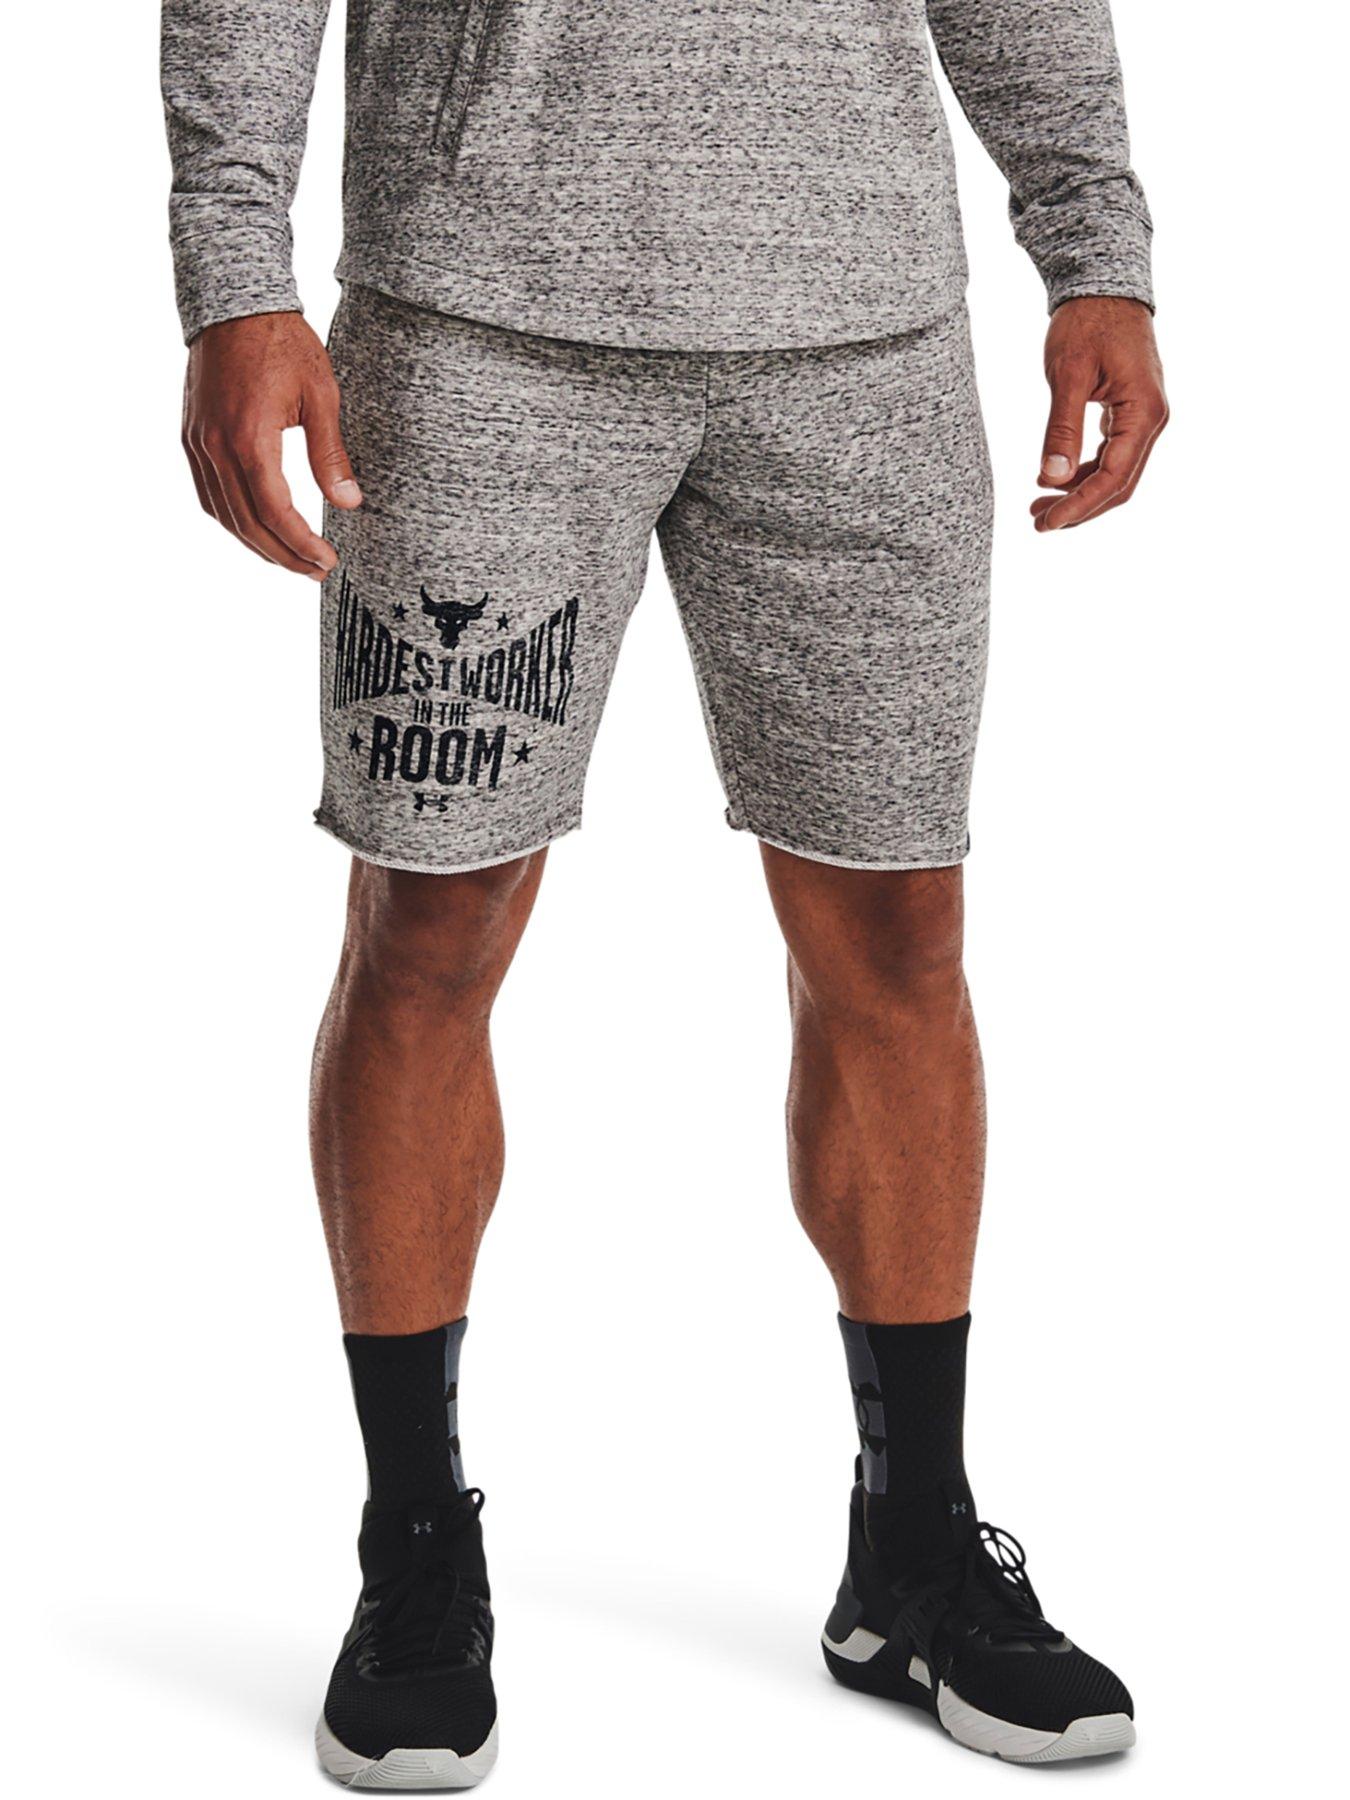 UNDER ARMOUR Training Project Rock Terry Shorts - Grey/Black, White/Black, Size M, Men